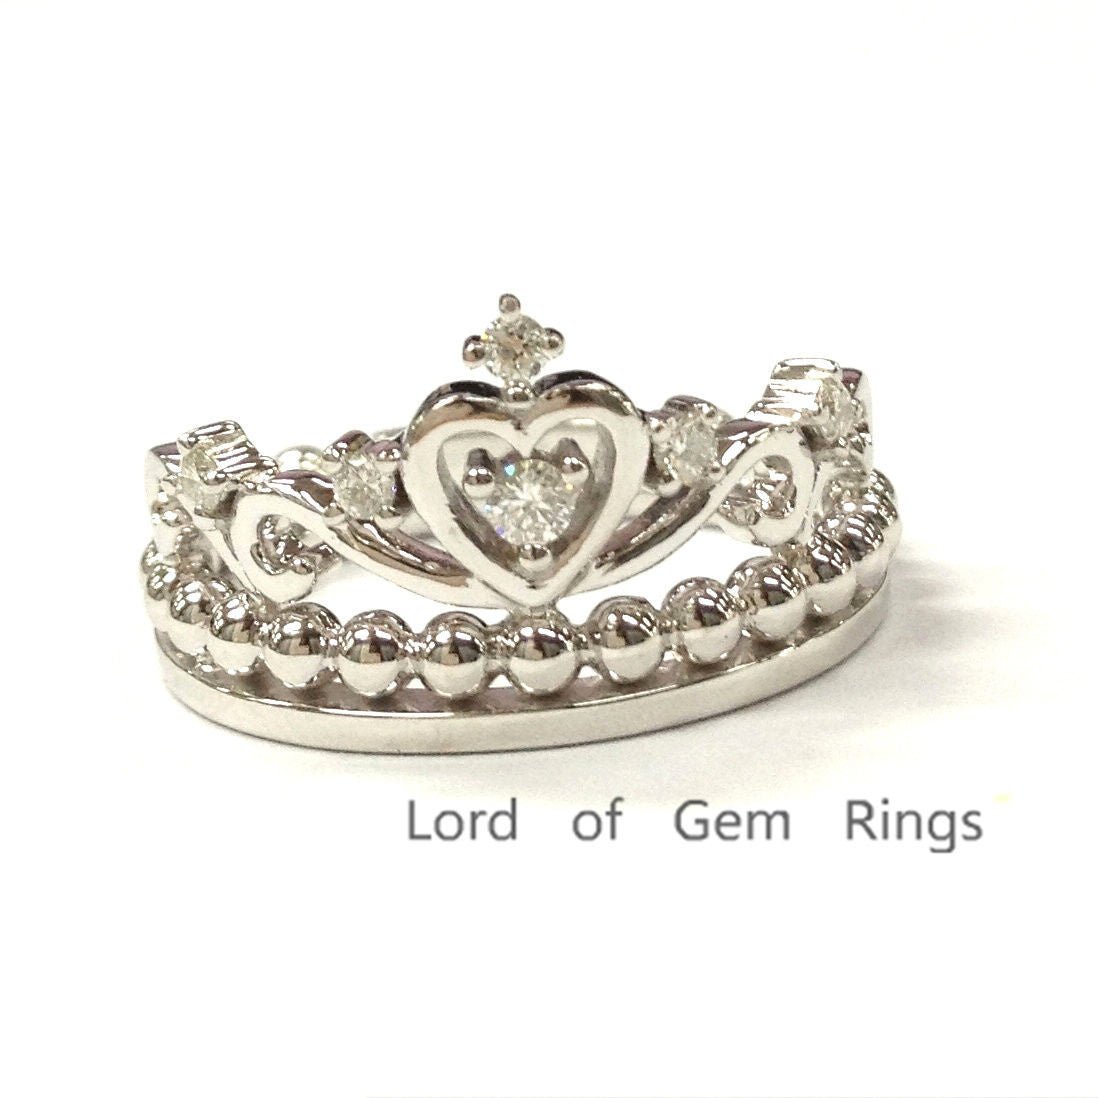 Brilliant Diamond Crown Engagement Ring 14K White Gold - Lord of Gem Rings